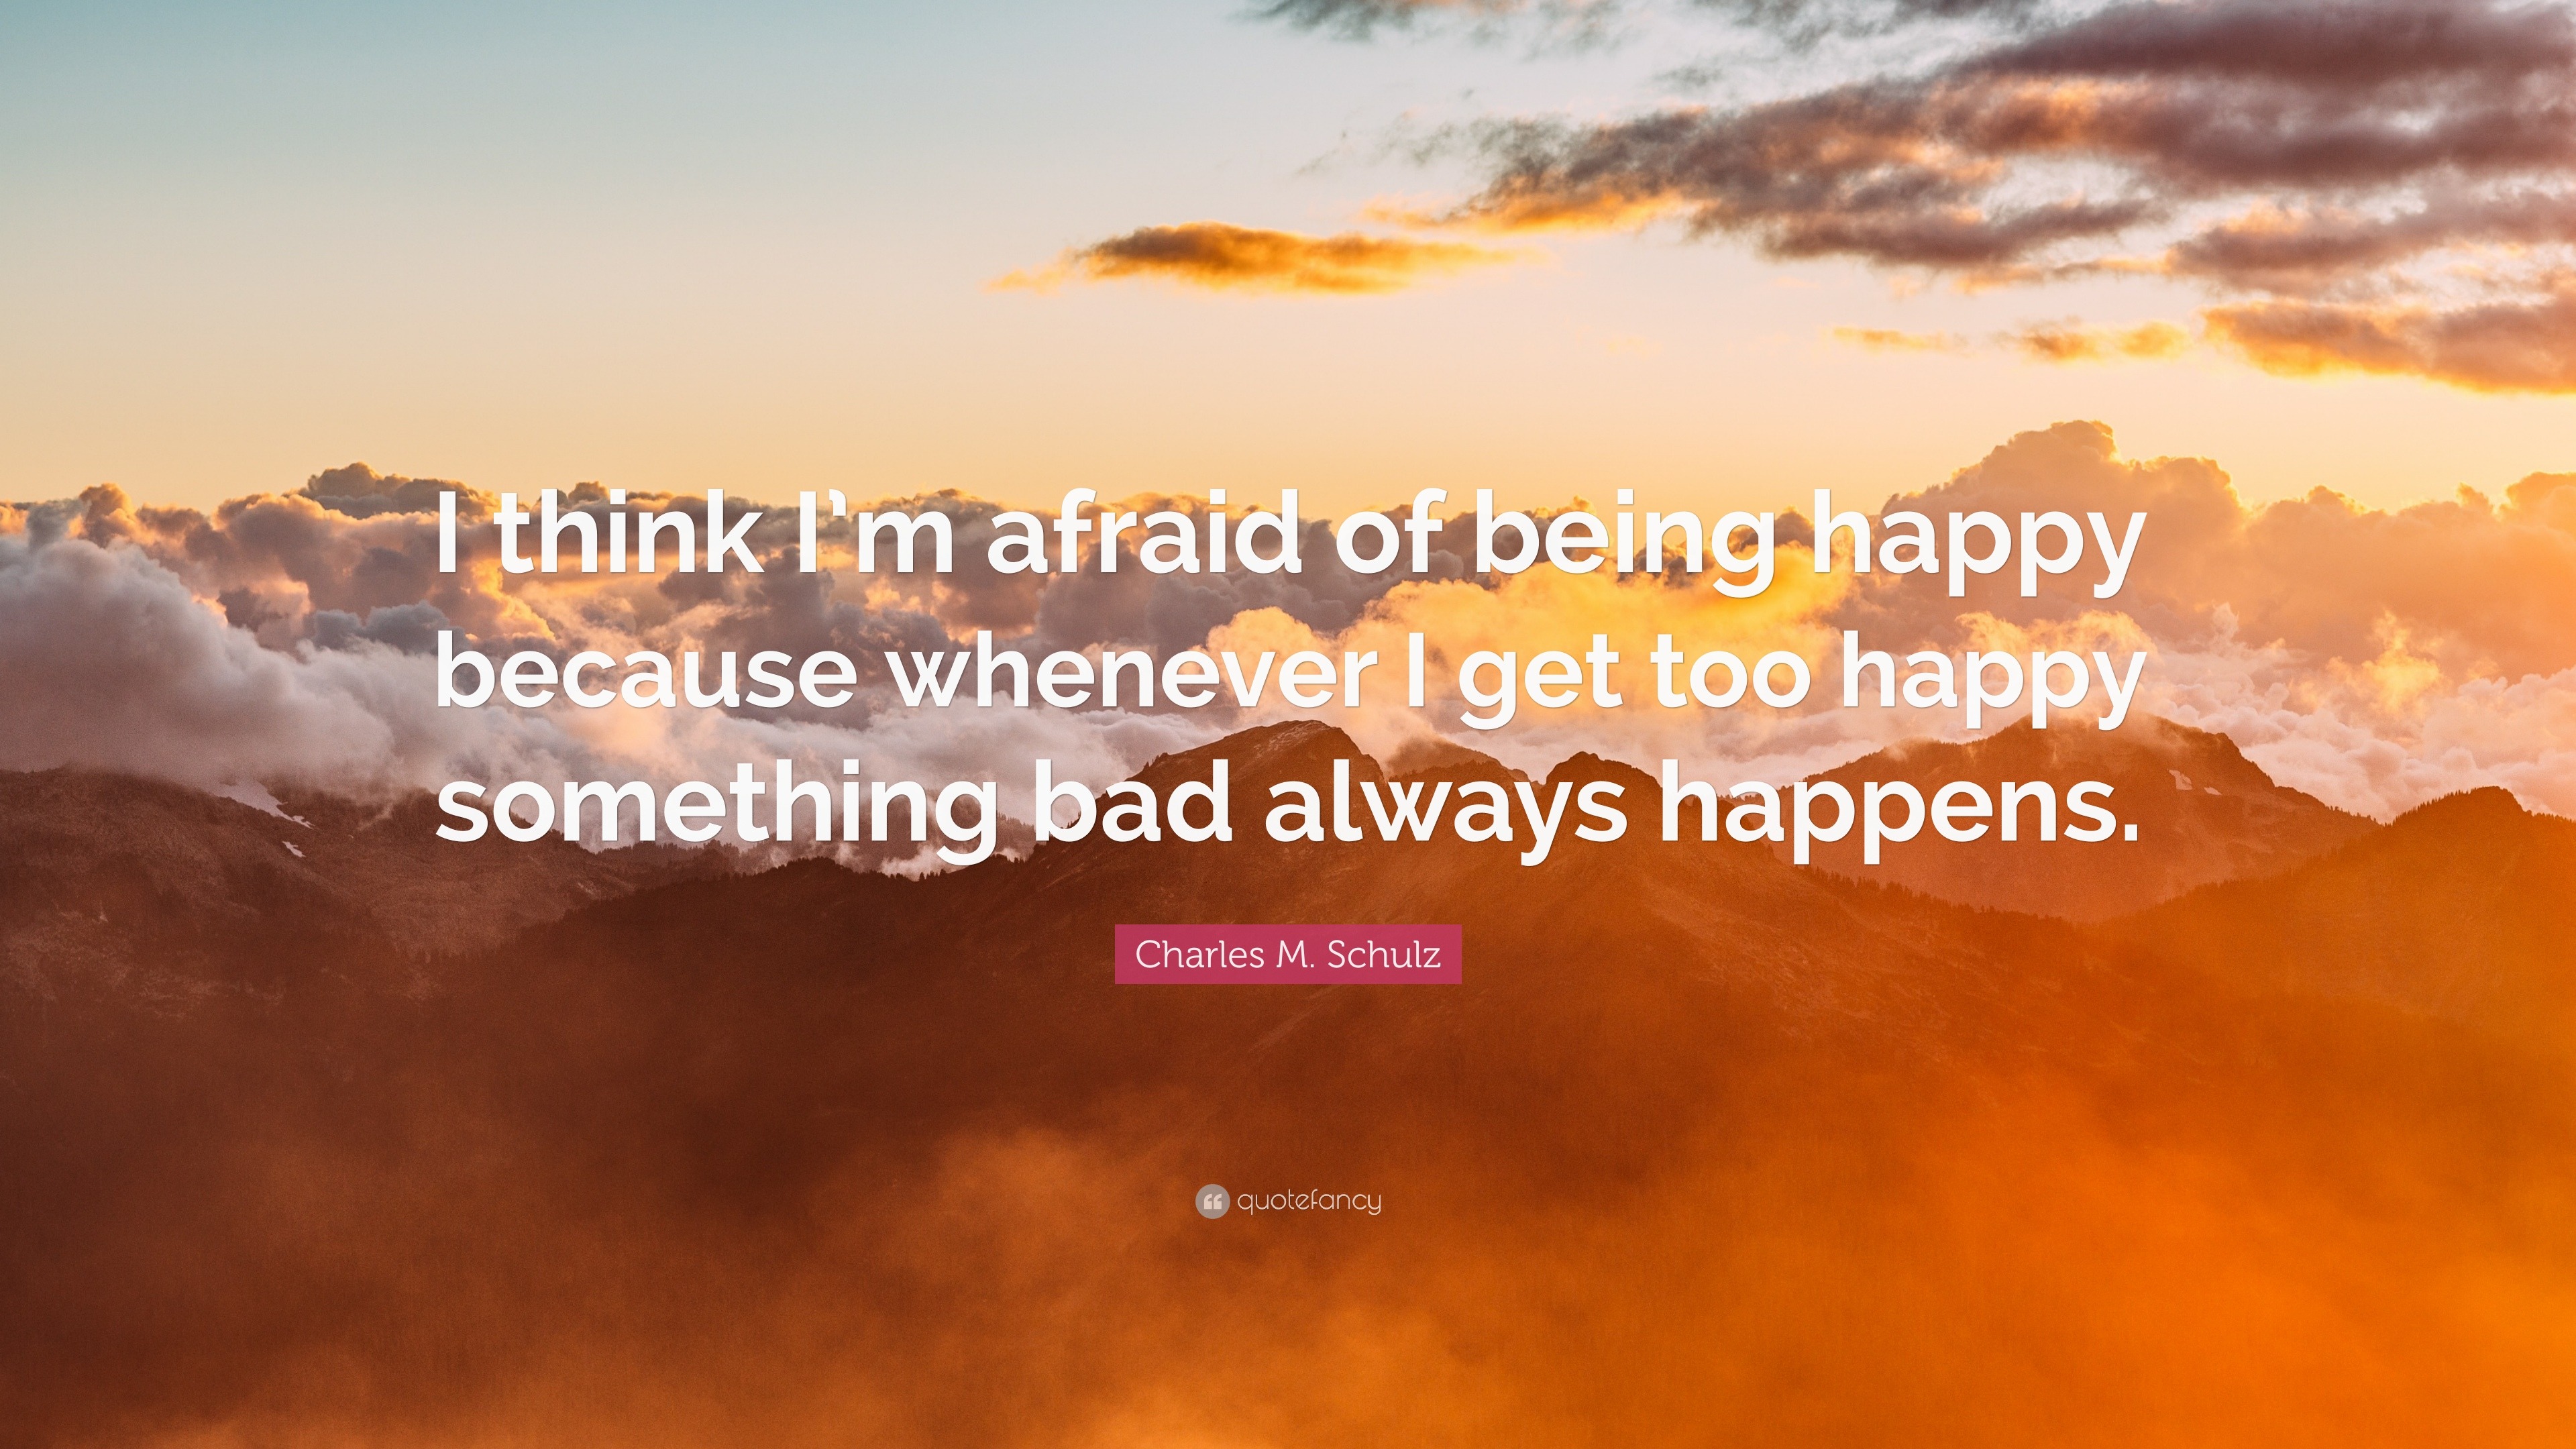 Charles M. Schulz Quote: “I think I’m afraid of being happy because ...